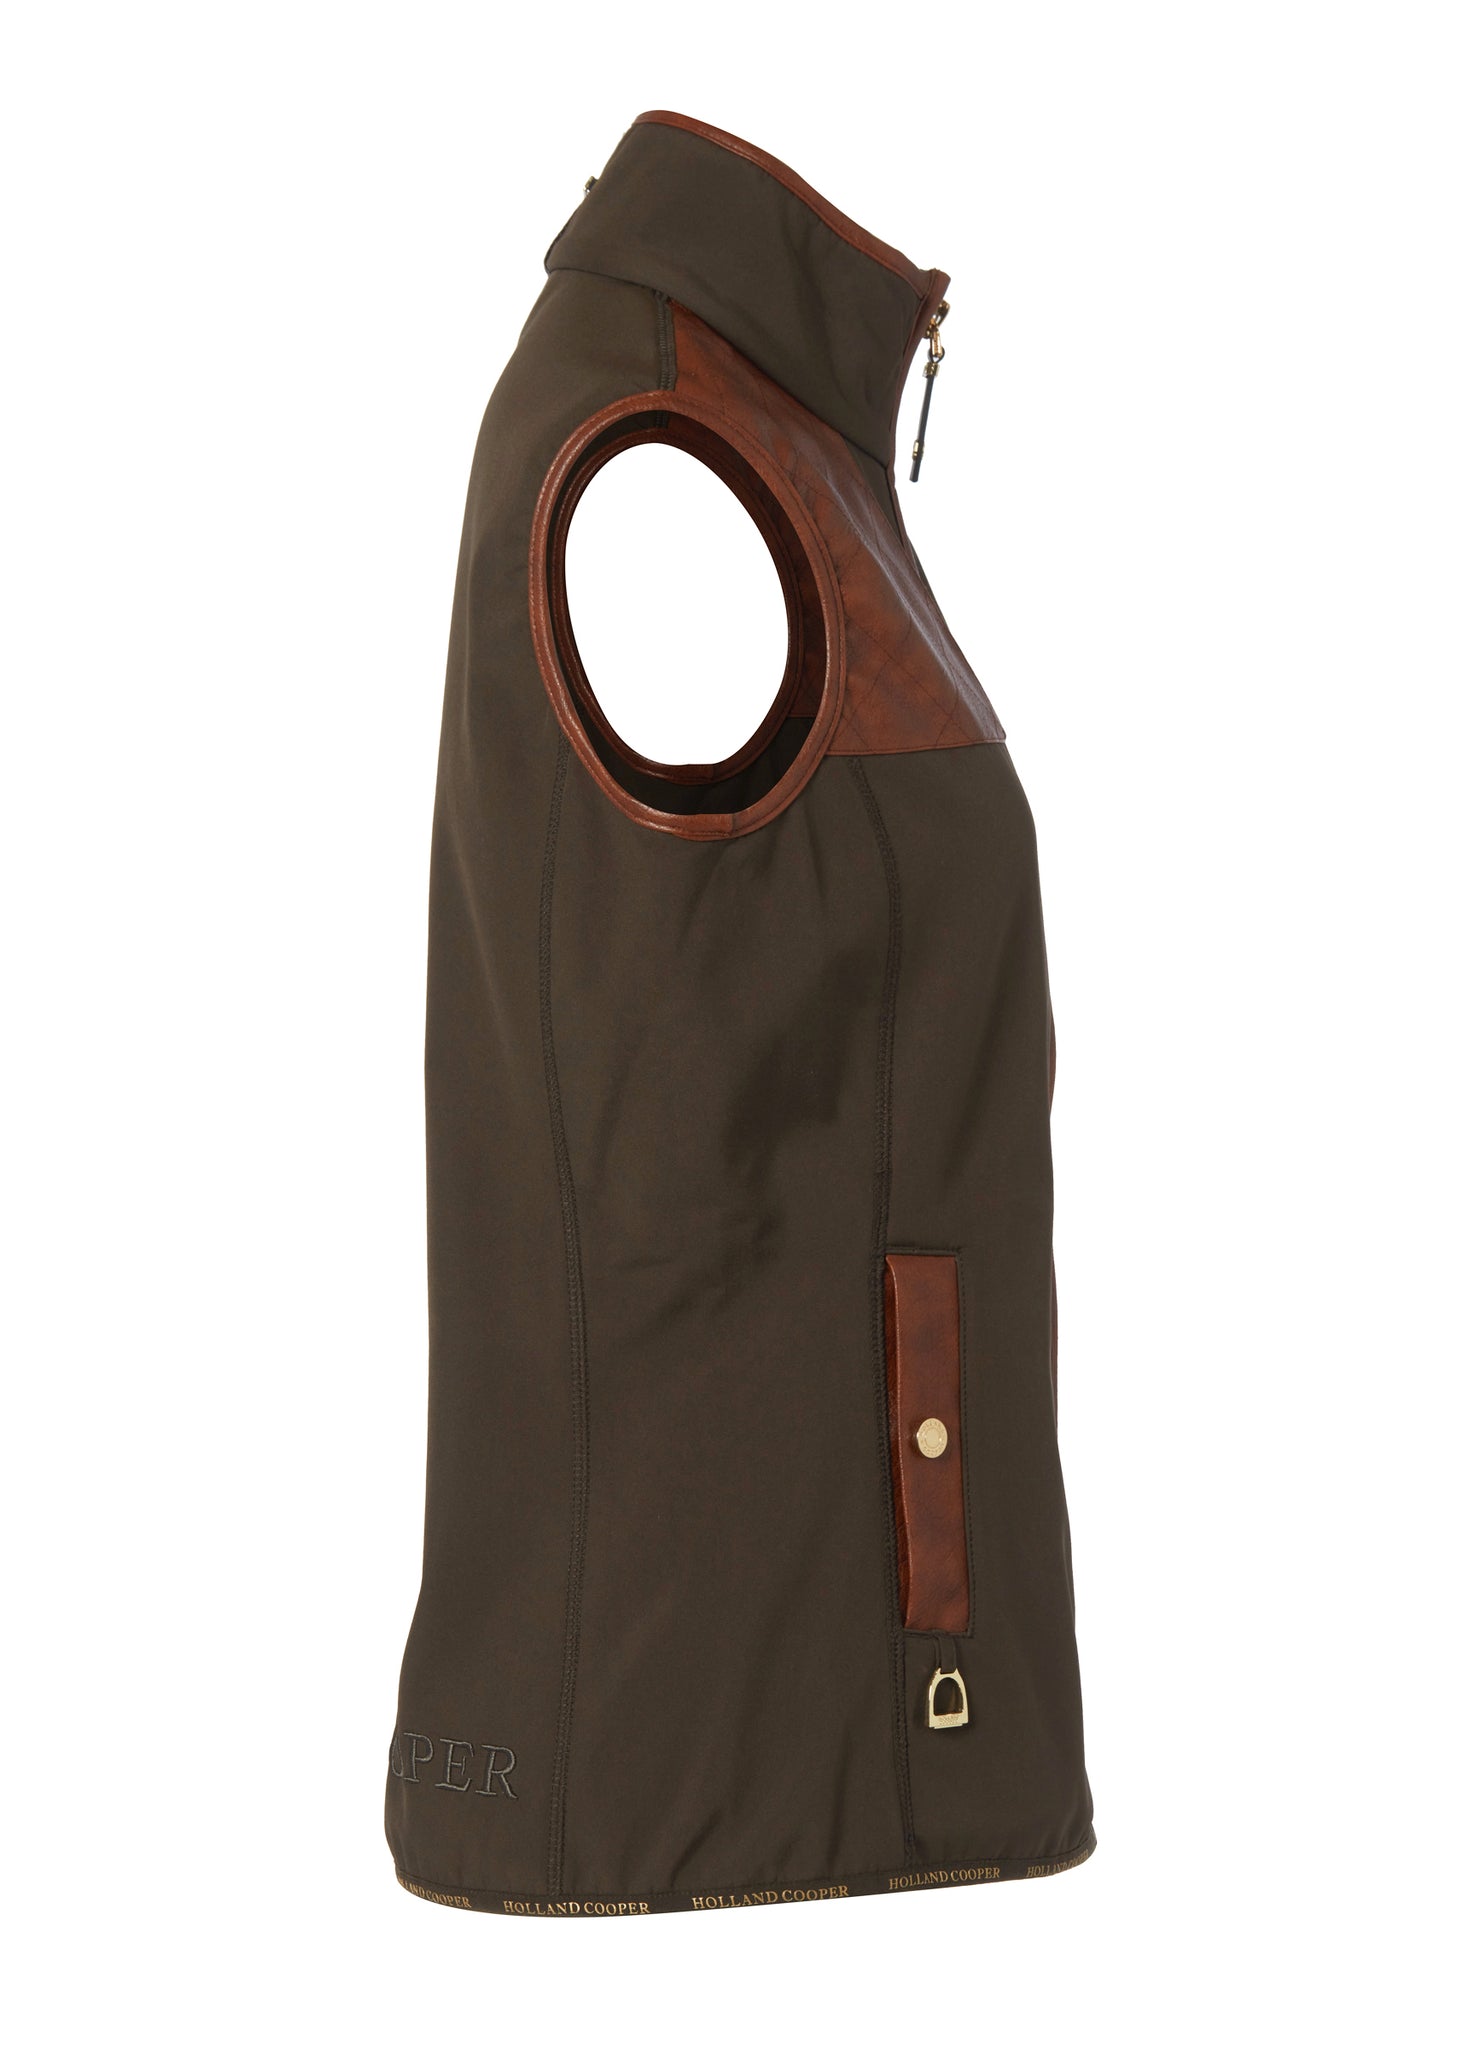 side of womens khaki gilet with dark brown leather seams along the arm holes pockets and down the zip with a gun patch on the shoulder and an embroidered logo